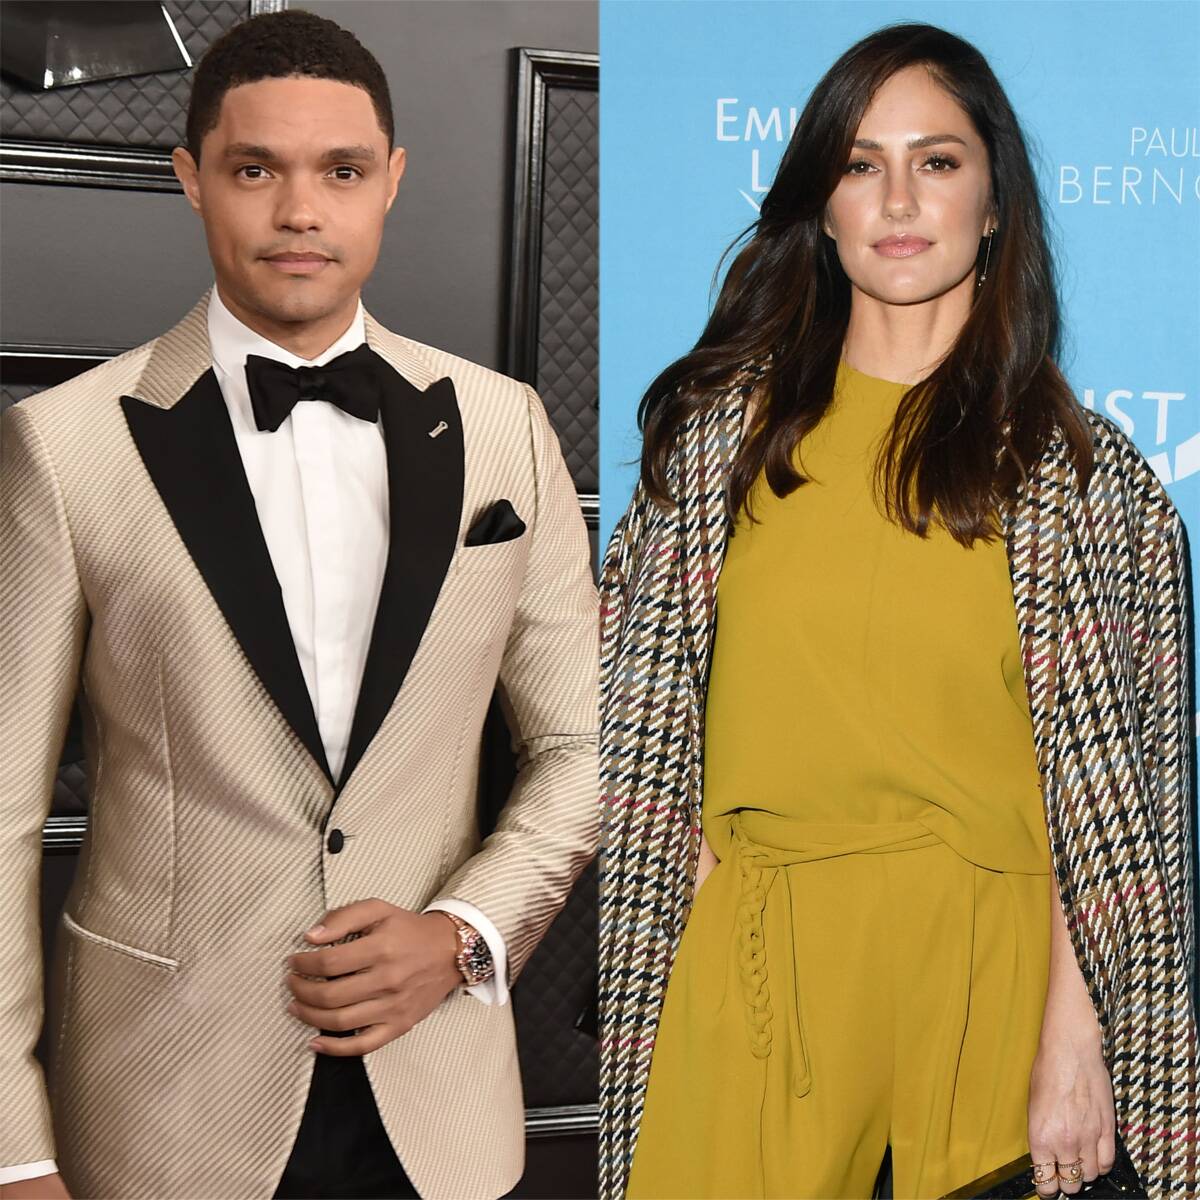 Trevor Noah Buys $27.5 Million Bel-Air Home as His Relationship With Minka Kelly Heats Up